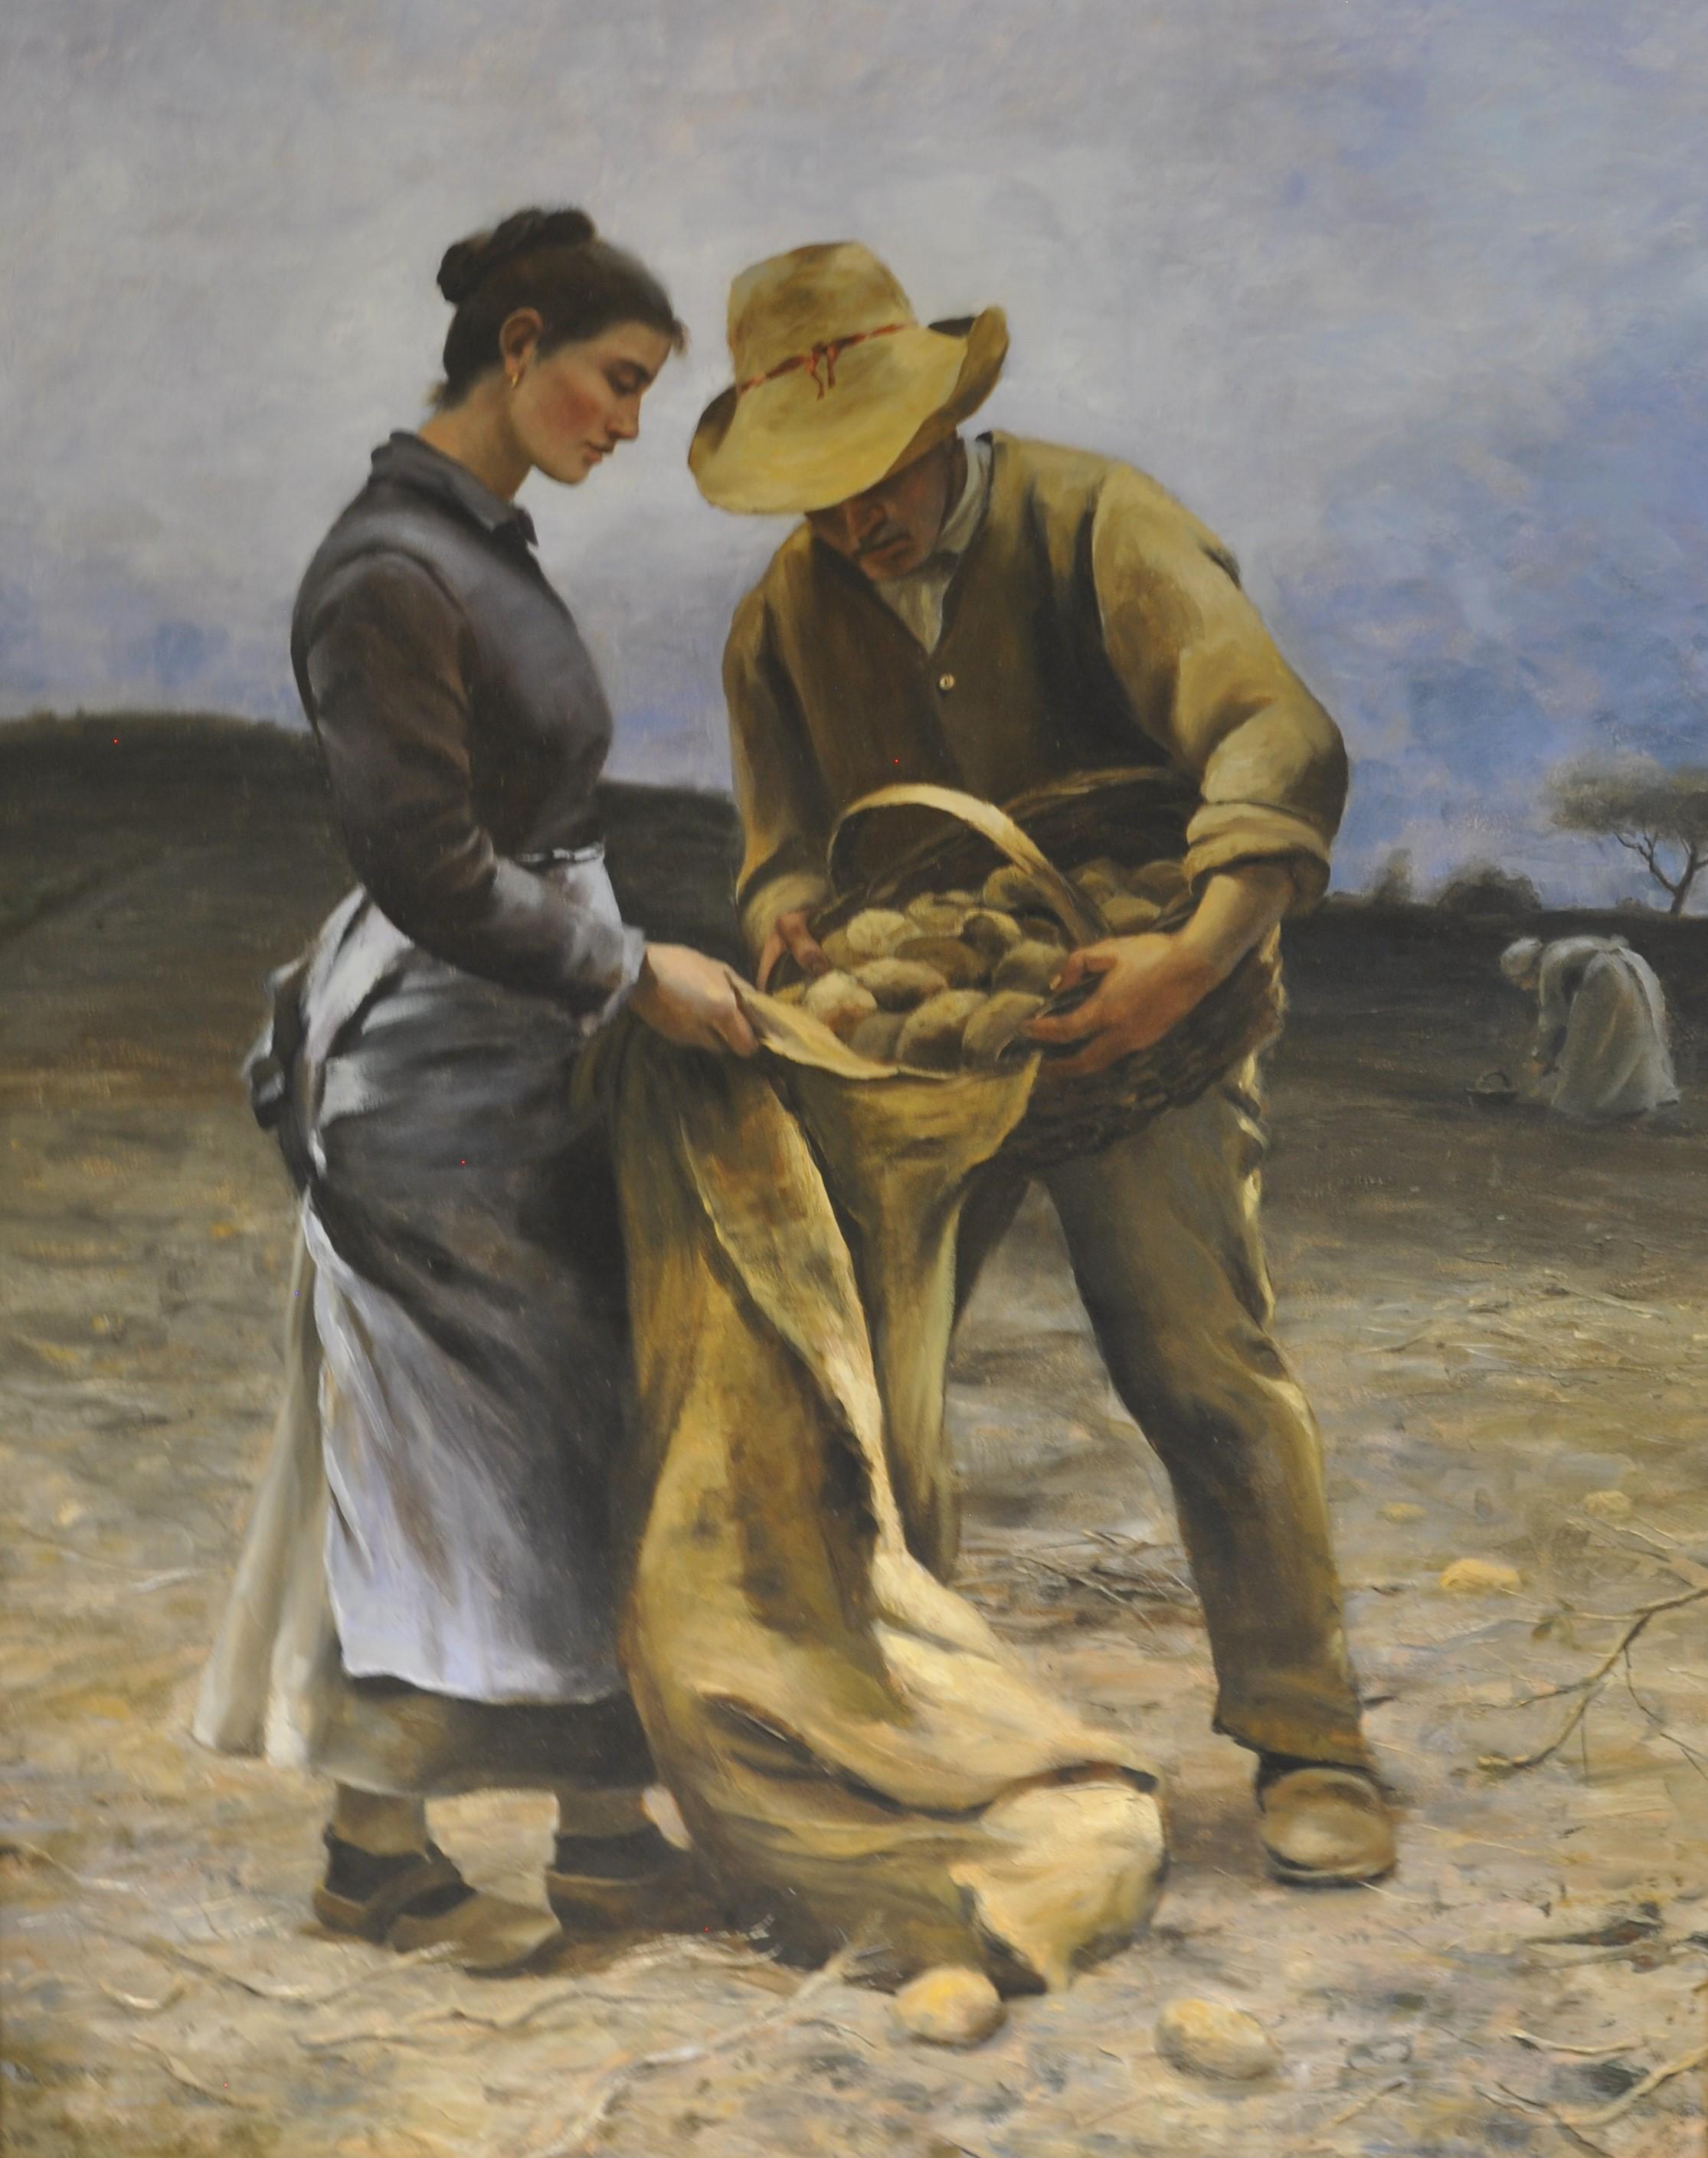 The Potato Gathers - Painting by Gregory Frank Harris